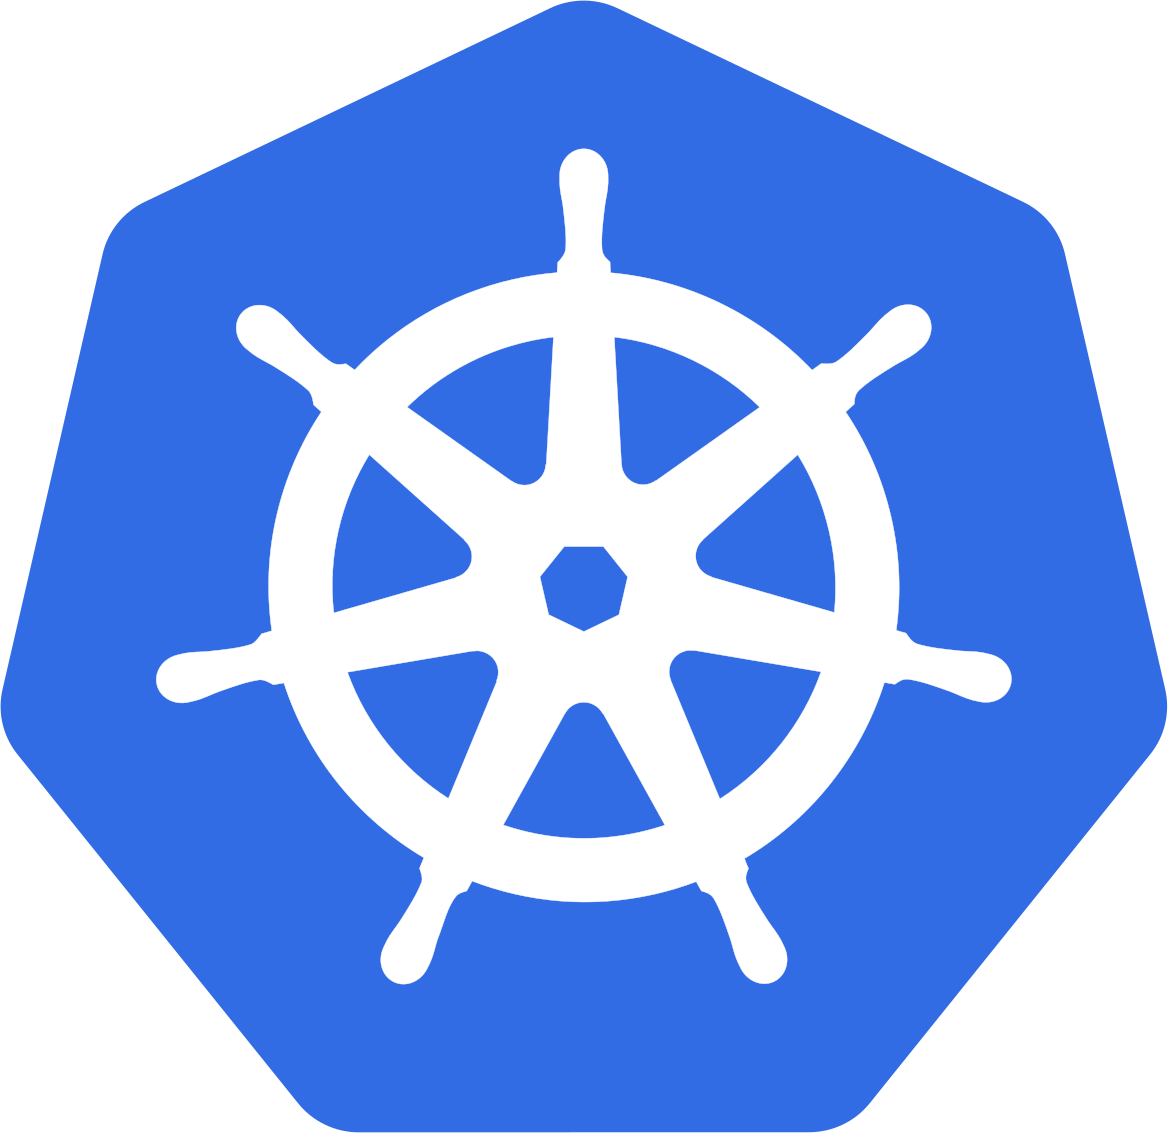 Logo of Kubernetes - open-source container orchestration software